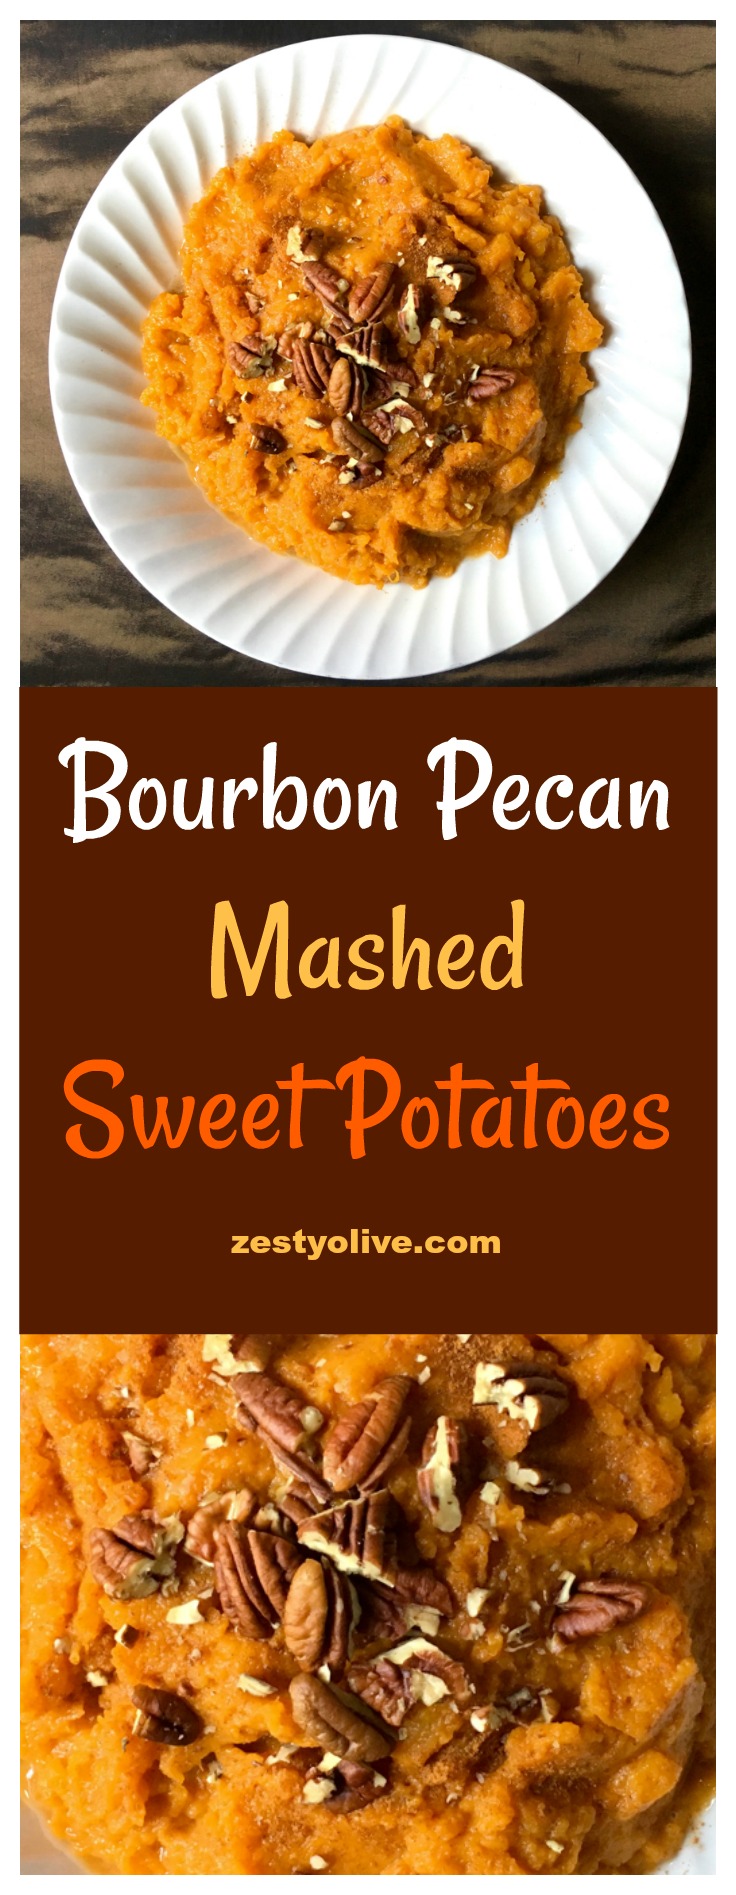 Bourbon Pecan Mashed Sweet Potatoes * Zesty Olive - Simple, Tasty, and ...